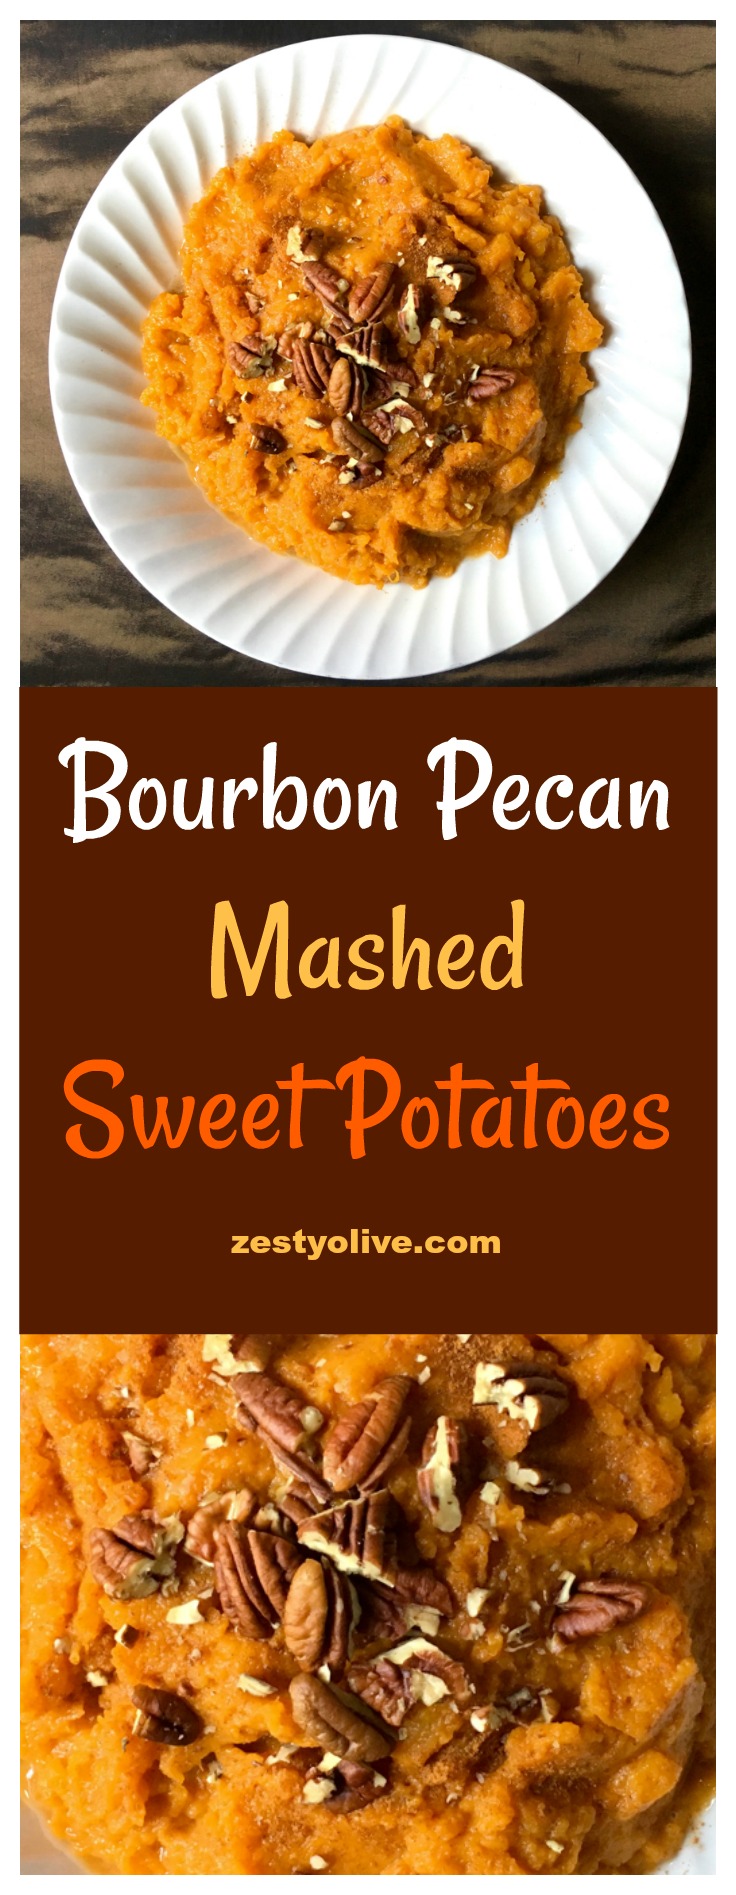 Bourbon Pecan Mashed Sweet Potatoes * Zesty Olive - Simple, Tasty, and ...